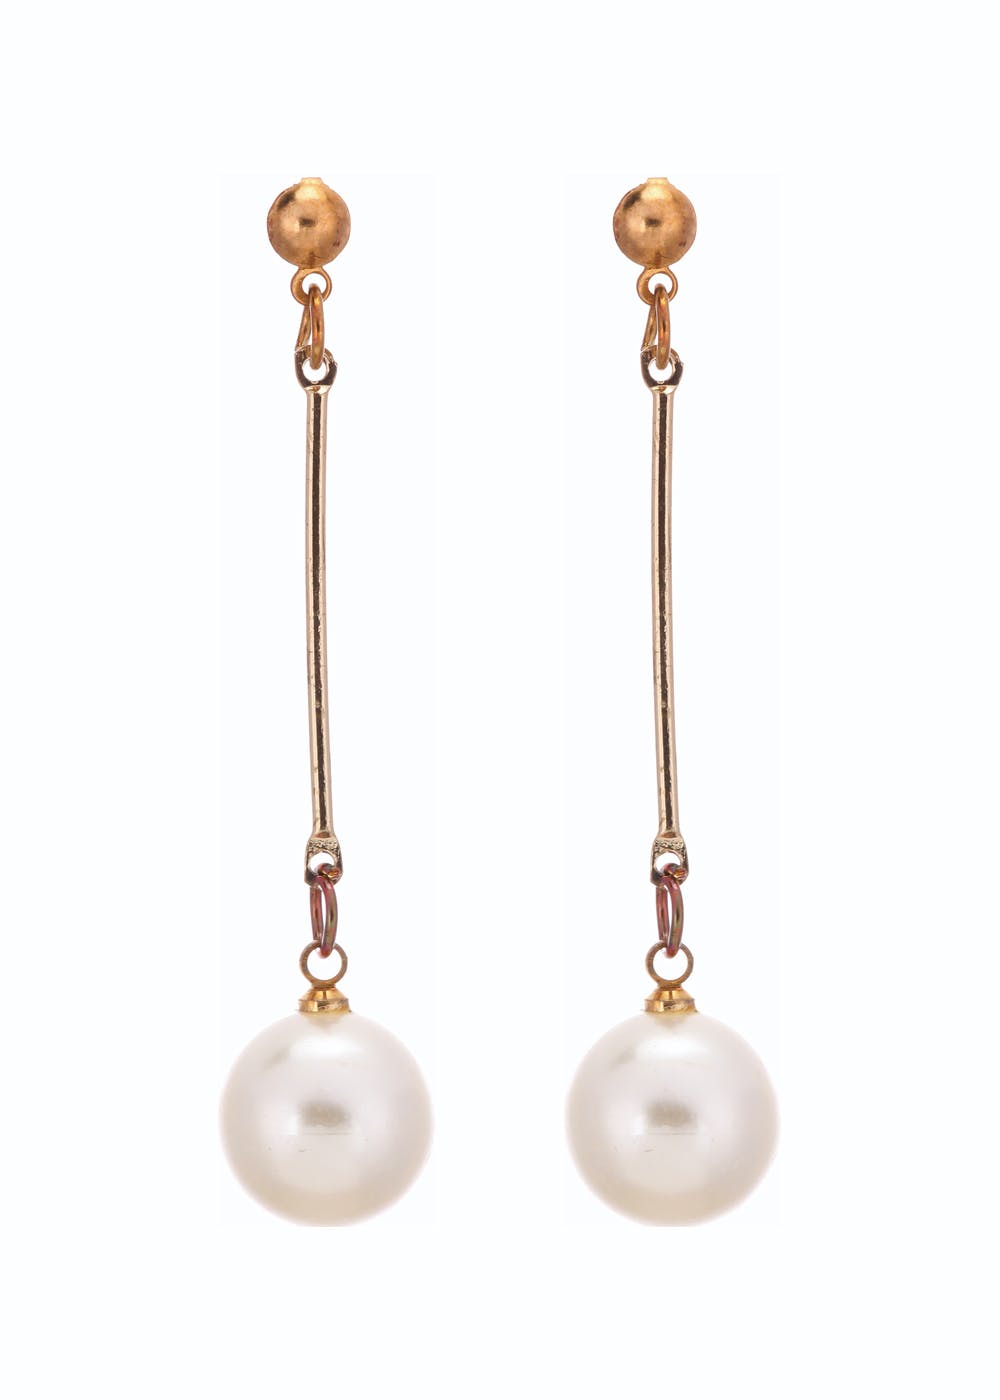 Flipkartcom  Buy Creeknest new style long round White pearl earrings For  Womens  Girls Alloy Stud Earring Pearl Alloy Brass Drops  Danglers  Online at Best Prices in India